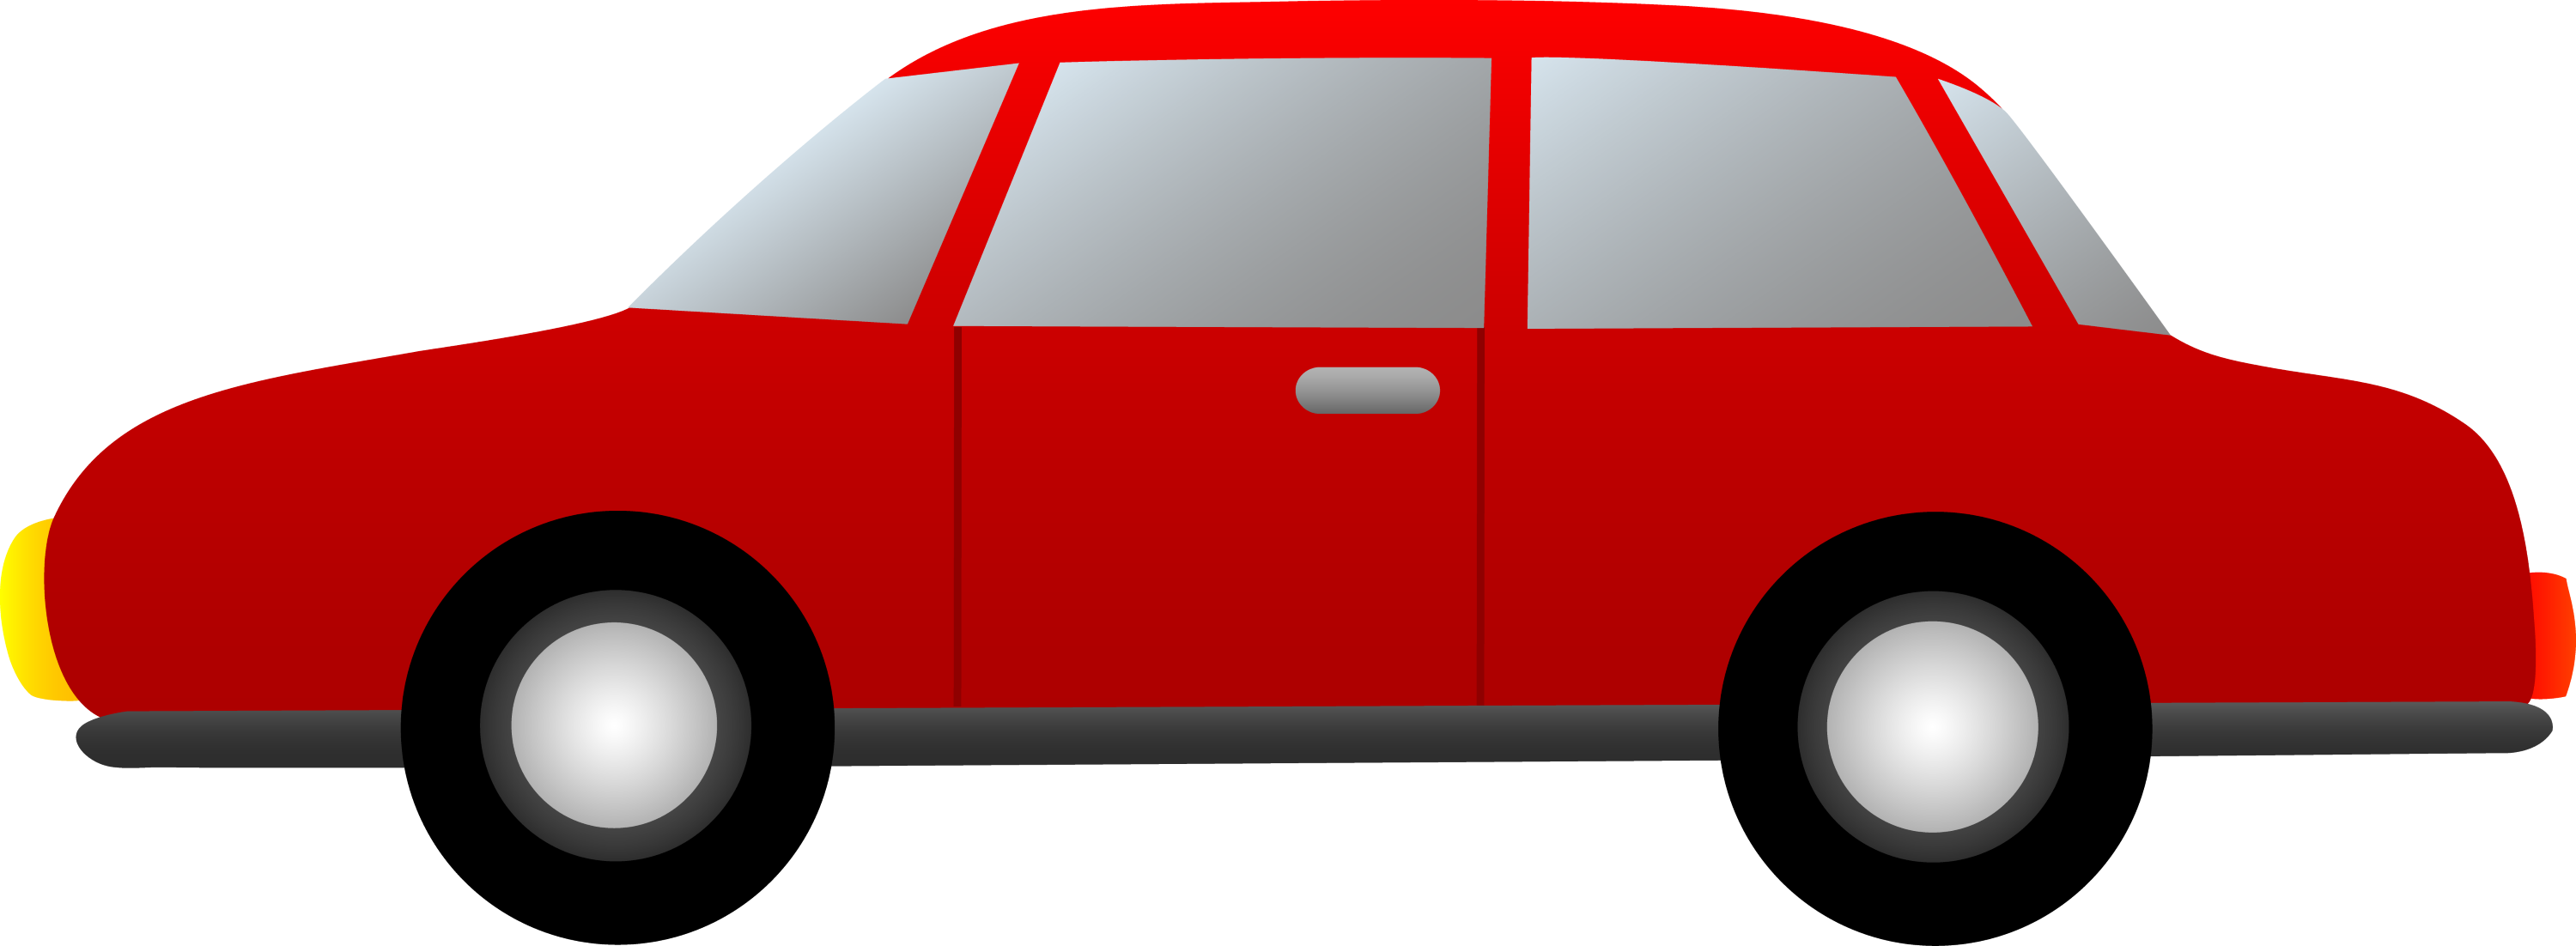 free clipart images vehicles - photo #26